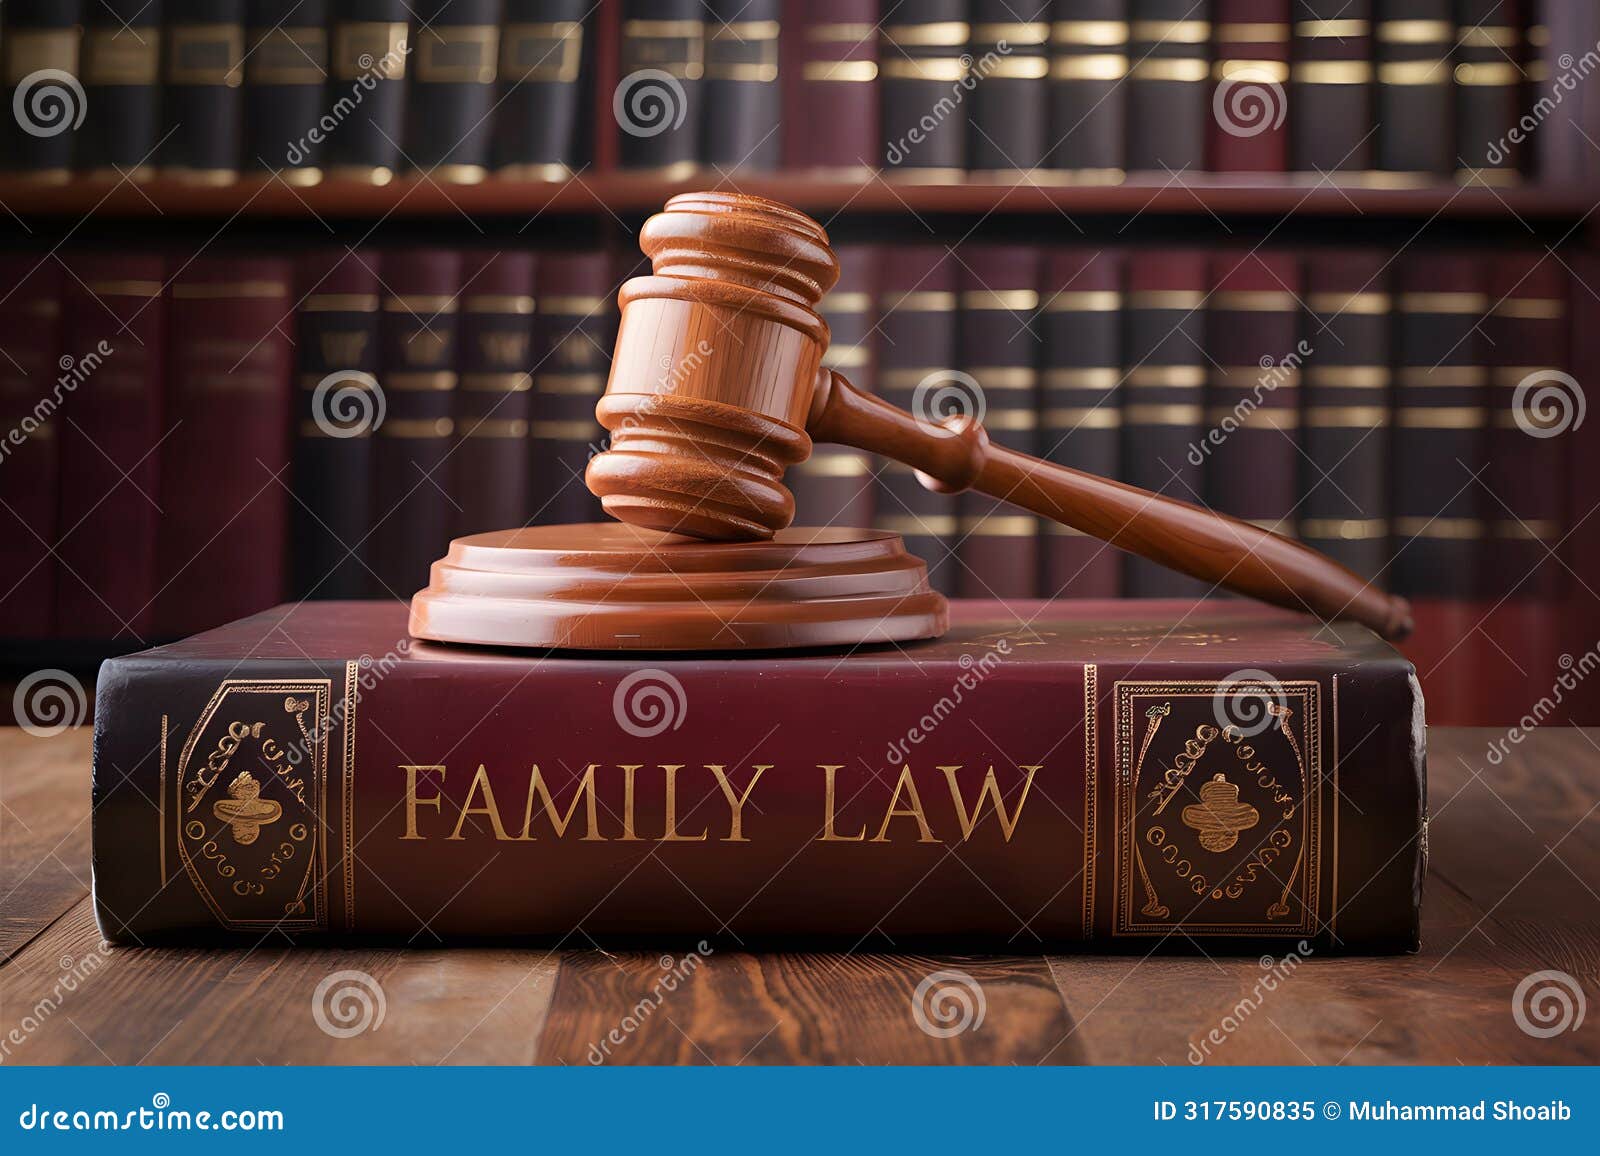 judicial authority ized by gavel on family law book in scholarly setting.